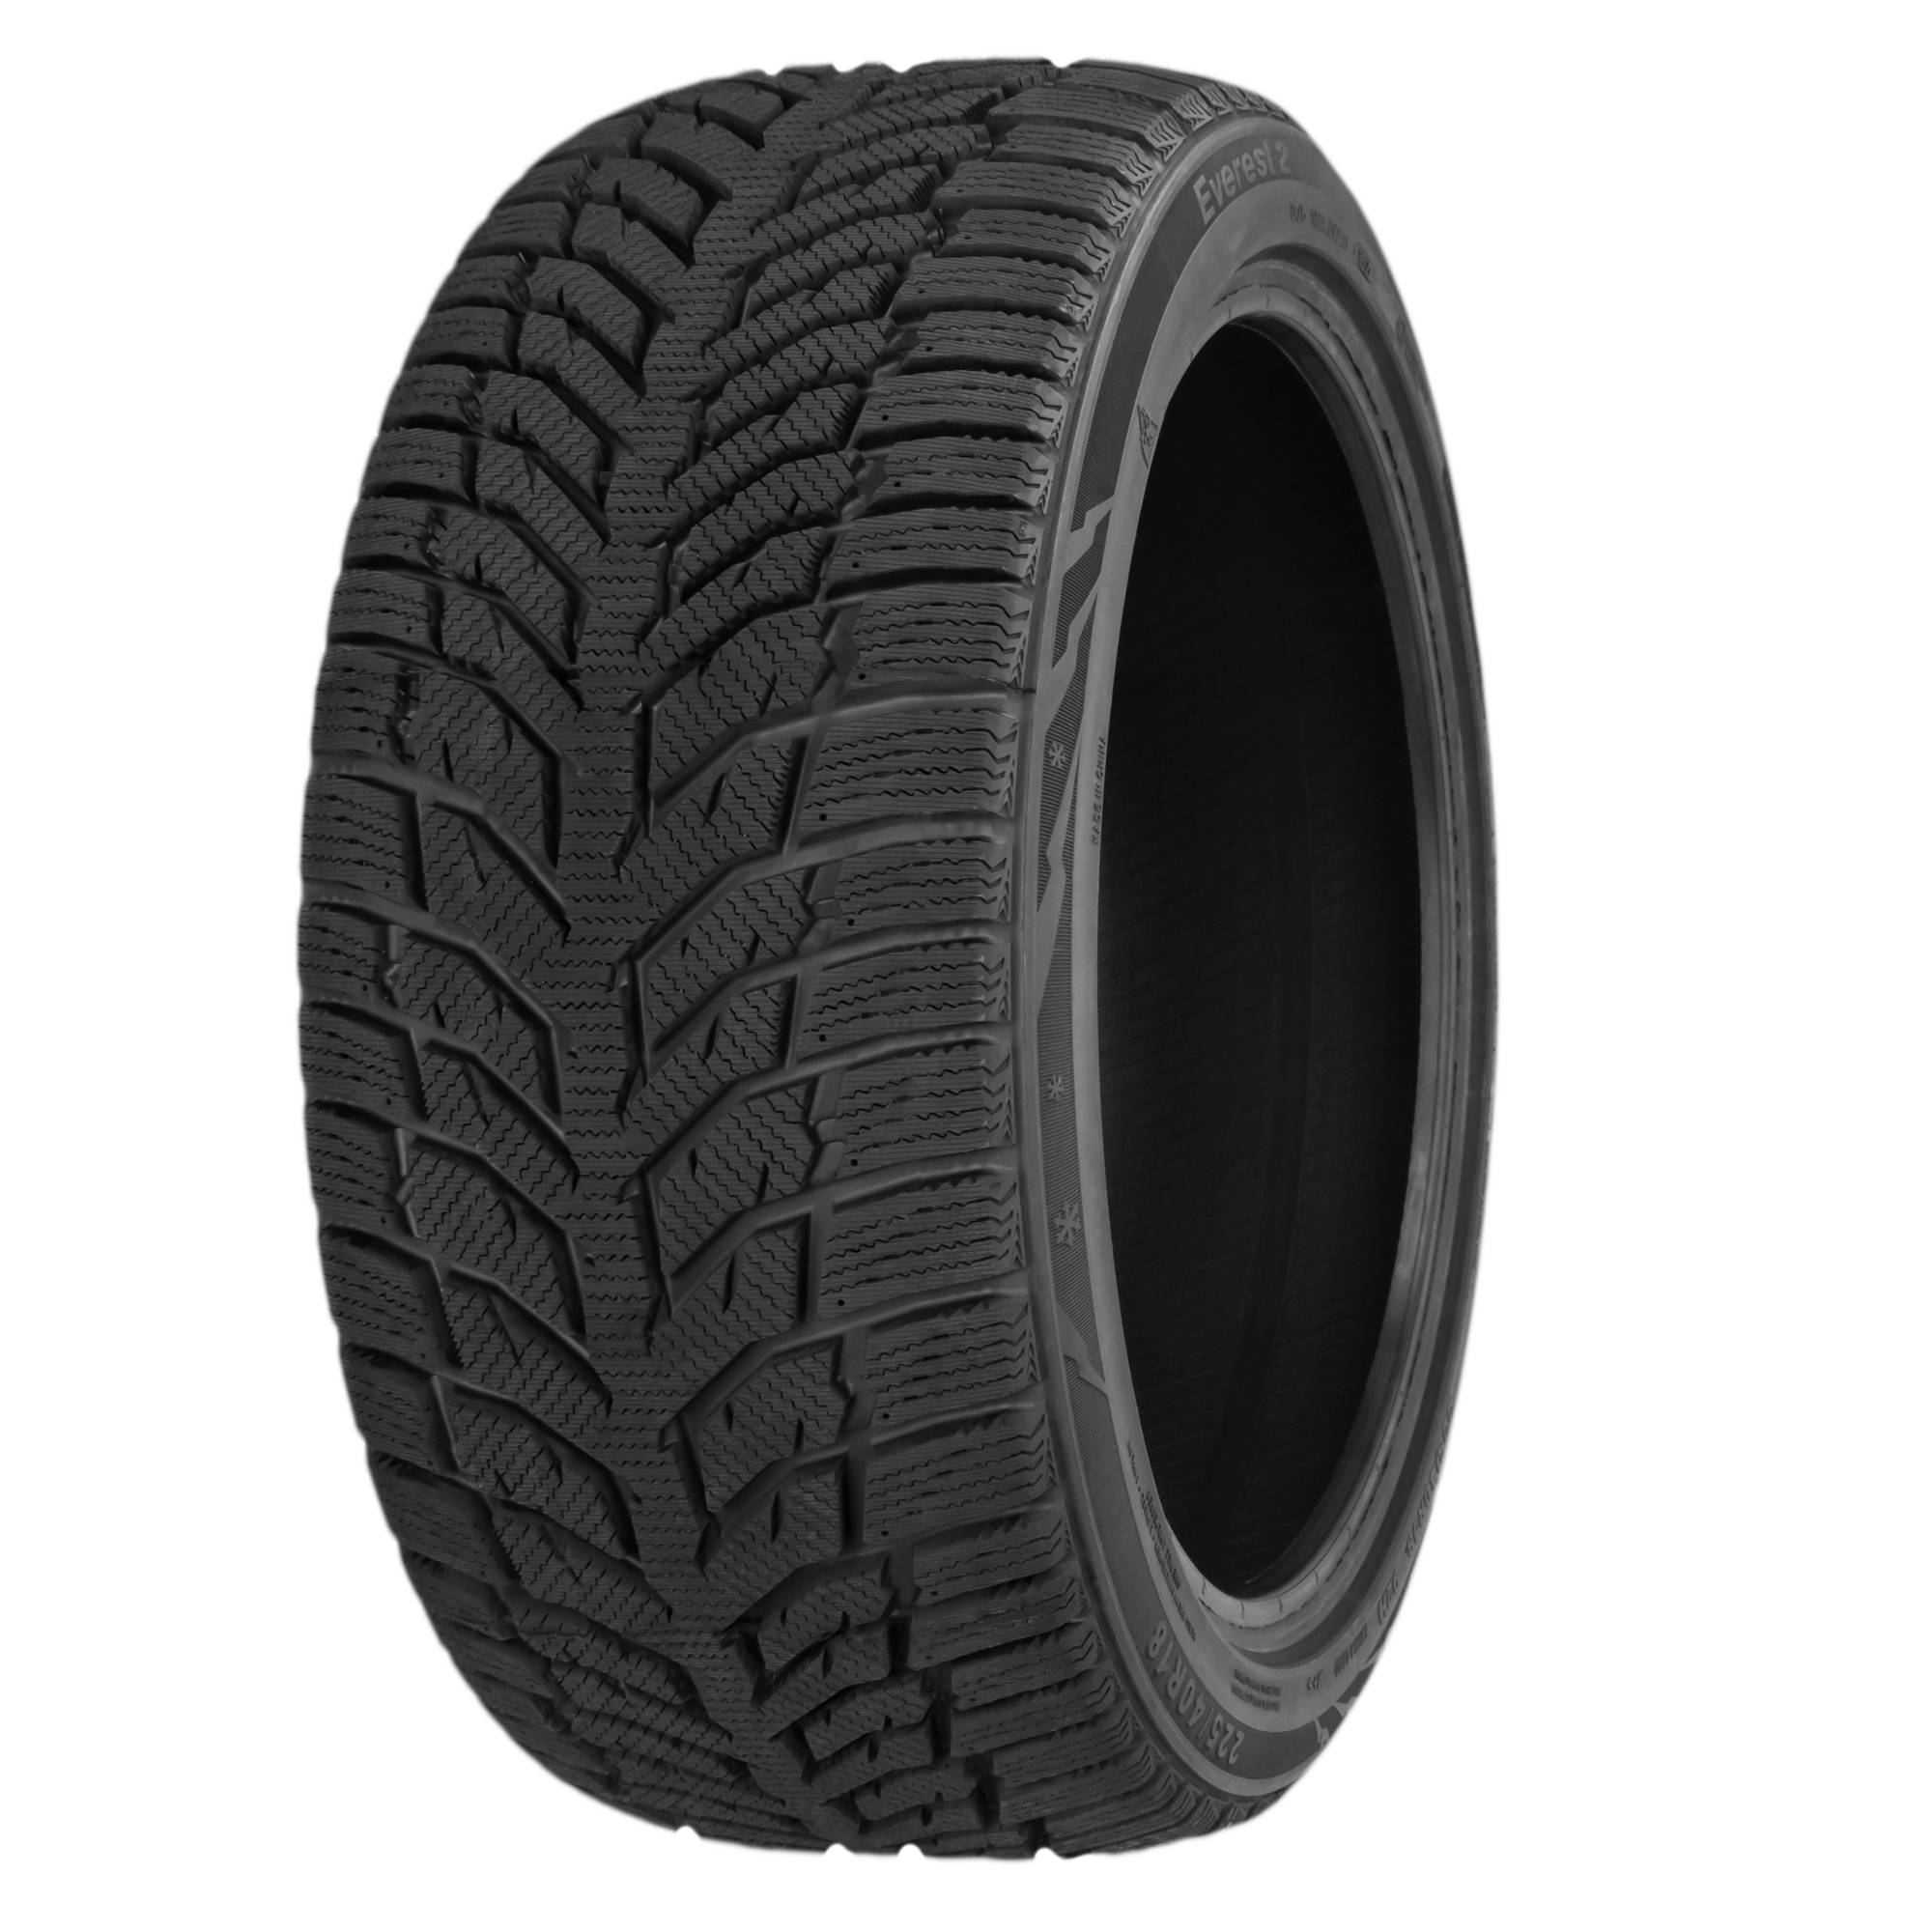 EAN 4250084605400, SYRON EVEREST 2 M+S 3PMSF, 185/60 R15 84 T